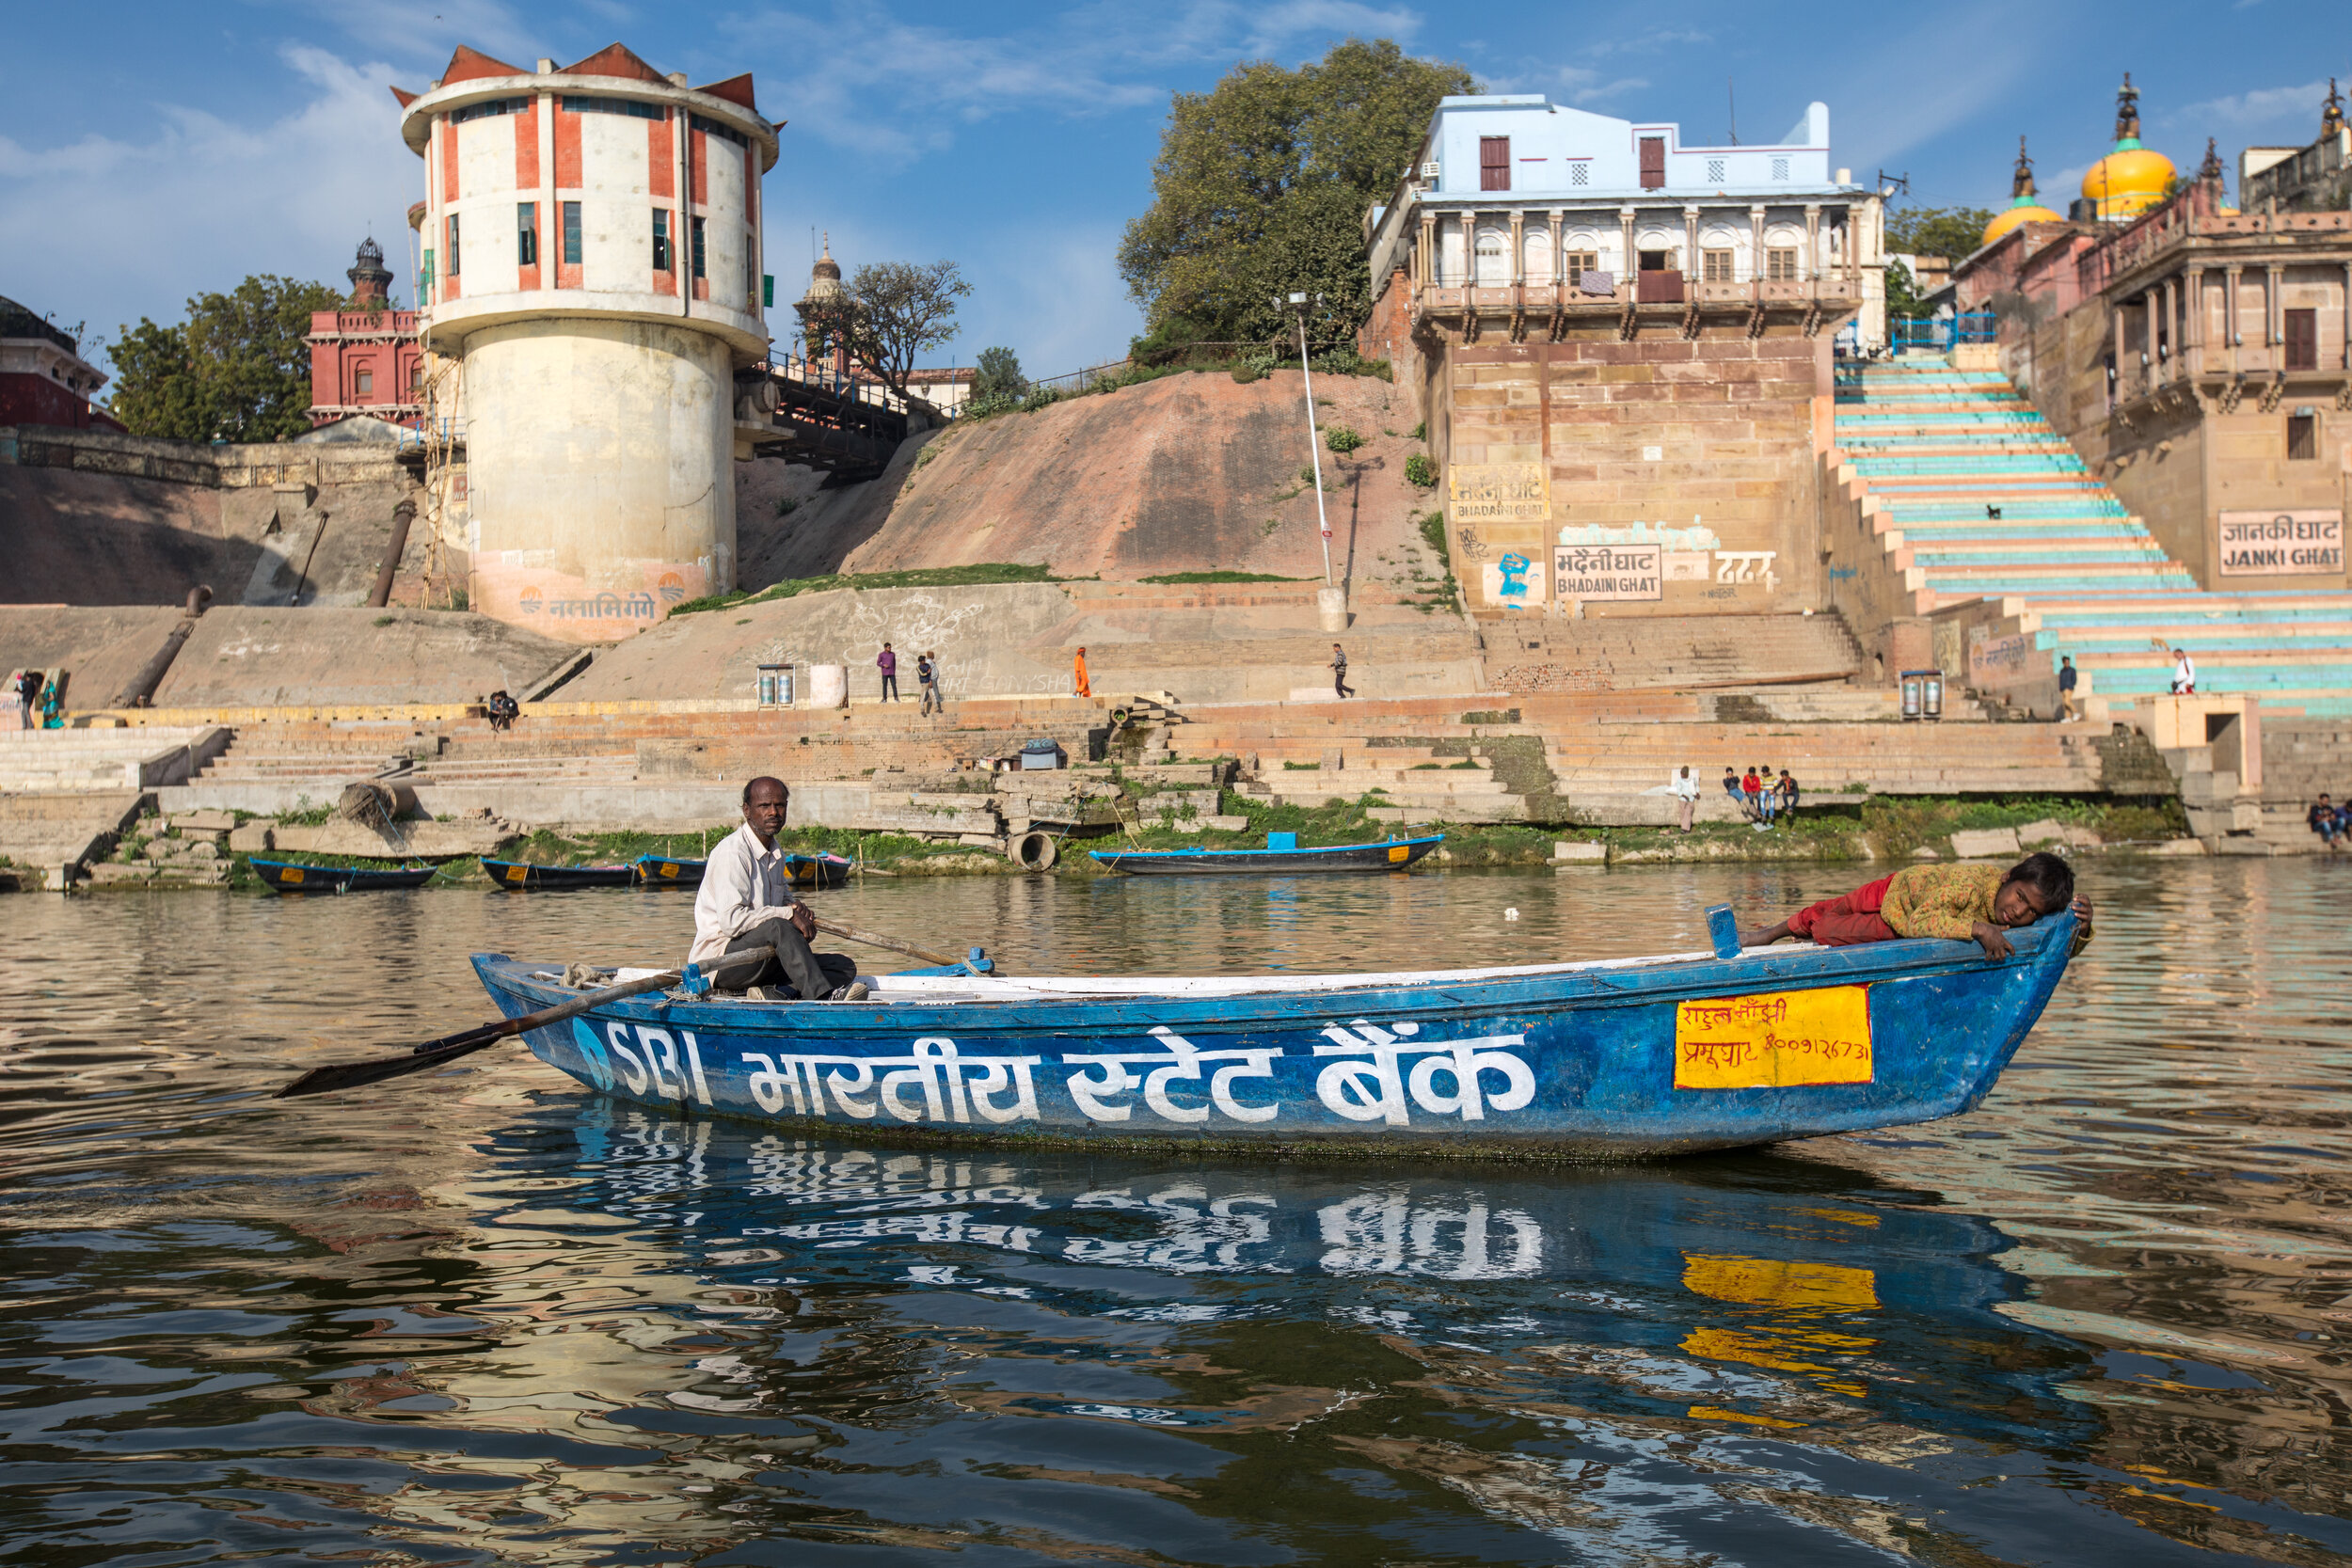 A boat tour of the River Ganges is a great way to photograph the ghats of Varanasi.